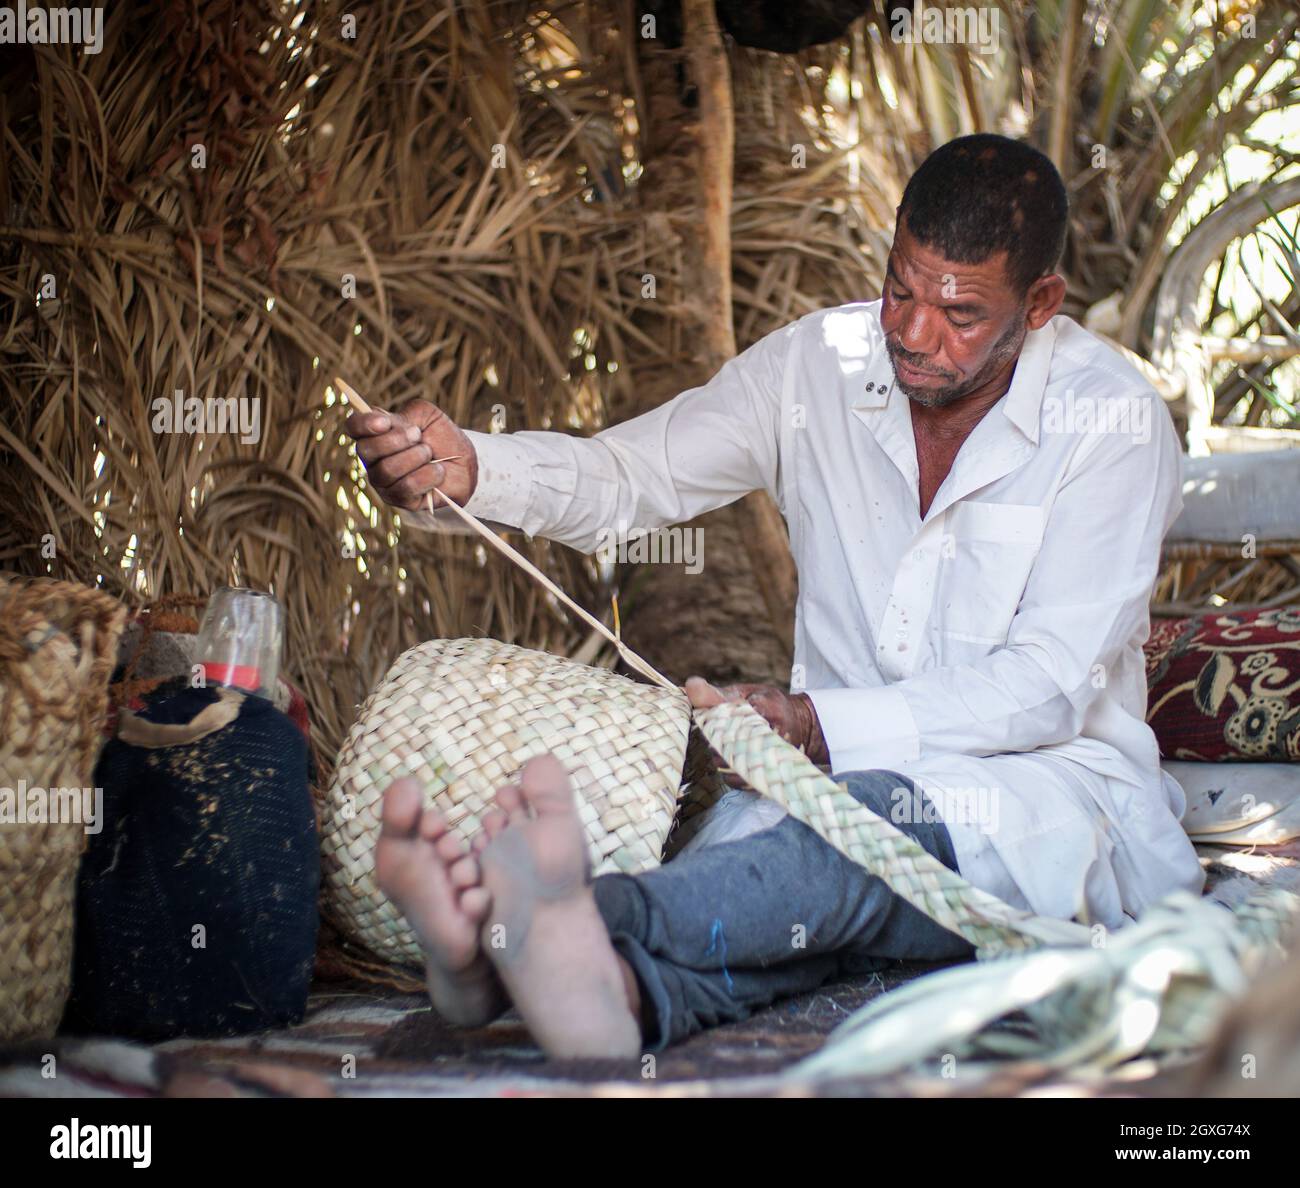 A Siwan man is weaving palm leaf into traditional bags and mat. The traditional straw plaited bags are still used widely in Siwa Oasis. Stock Photo